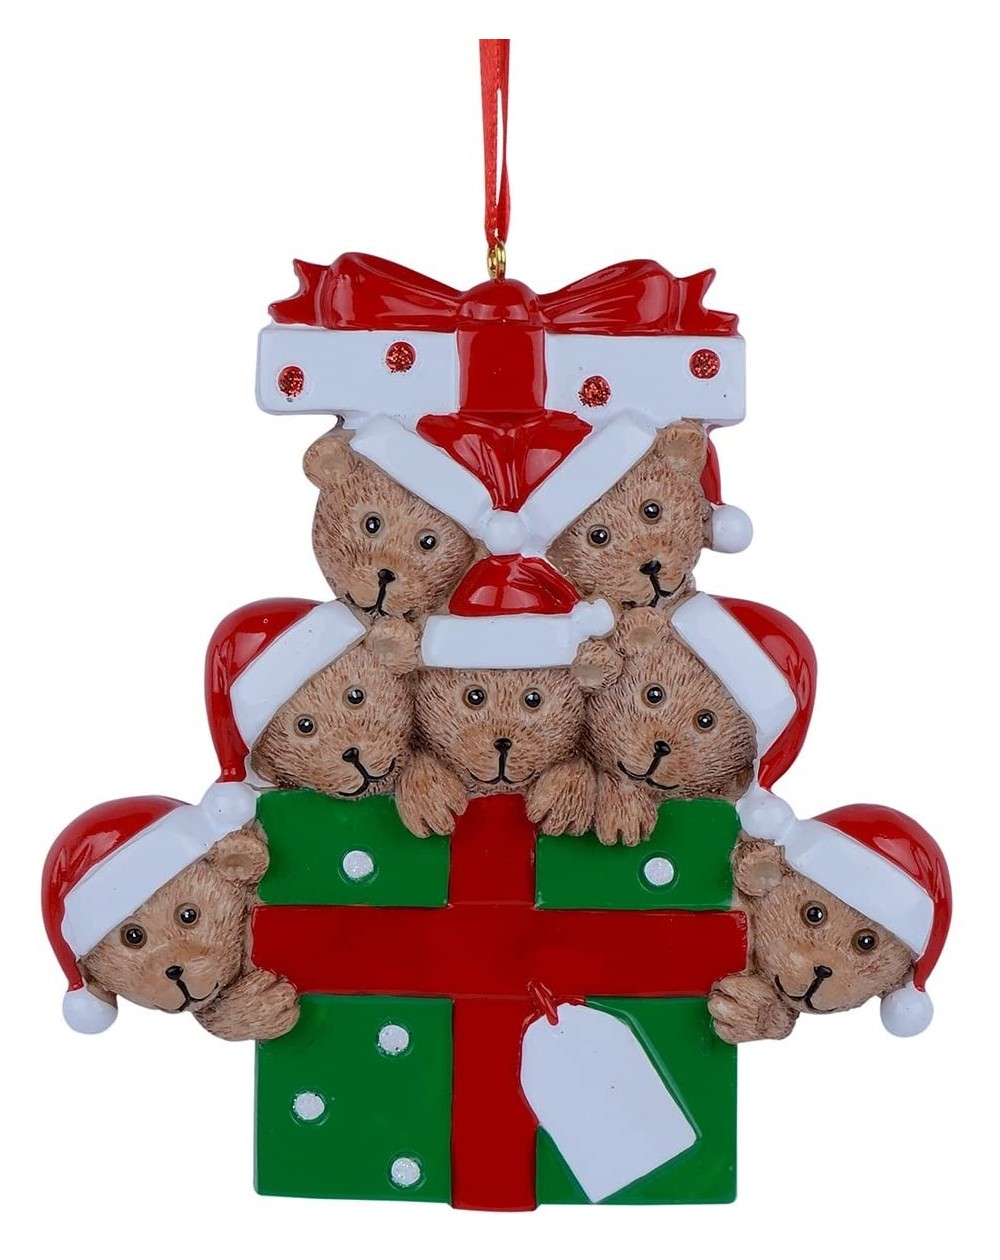 Ornaments Bear Gift Family of 7 Personalized Ornament for Christmas Tree Decoration - Free Customization - Family of 7 - CY18...